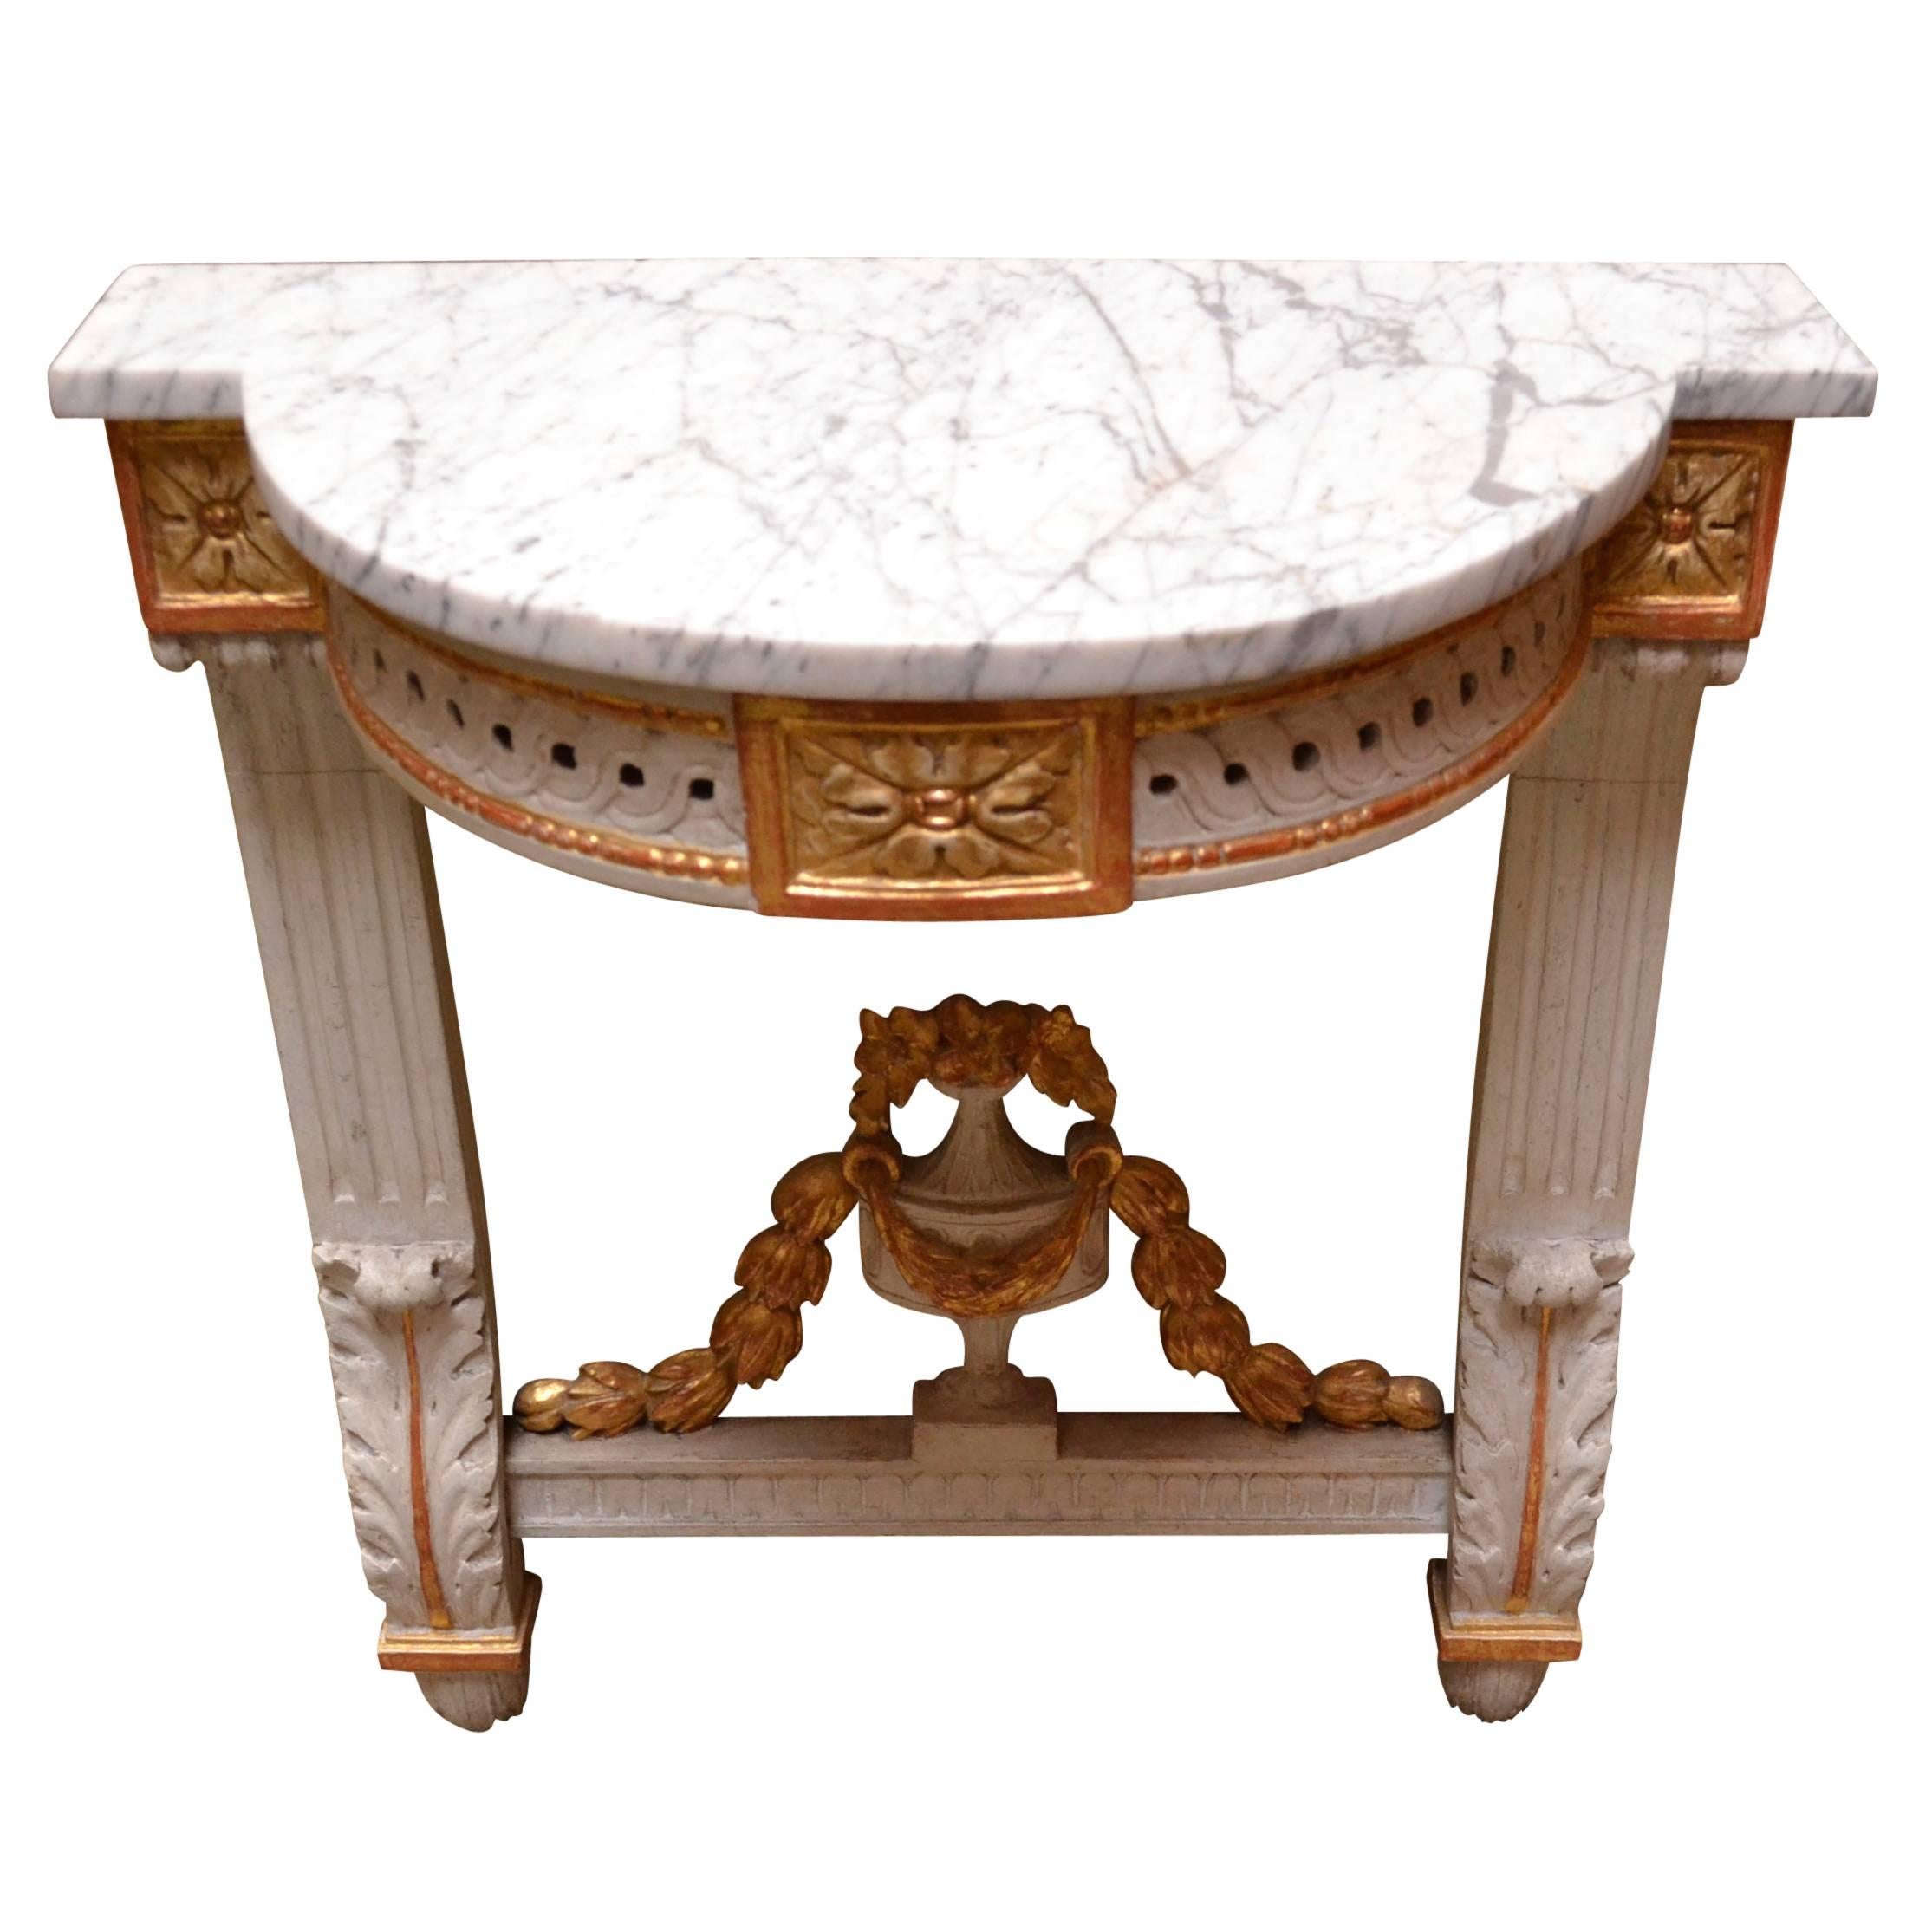 19th Century Danish Louis Seize Demilune Marble Top Wall Console